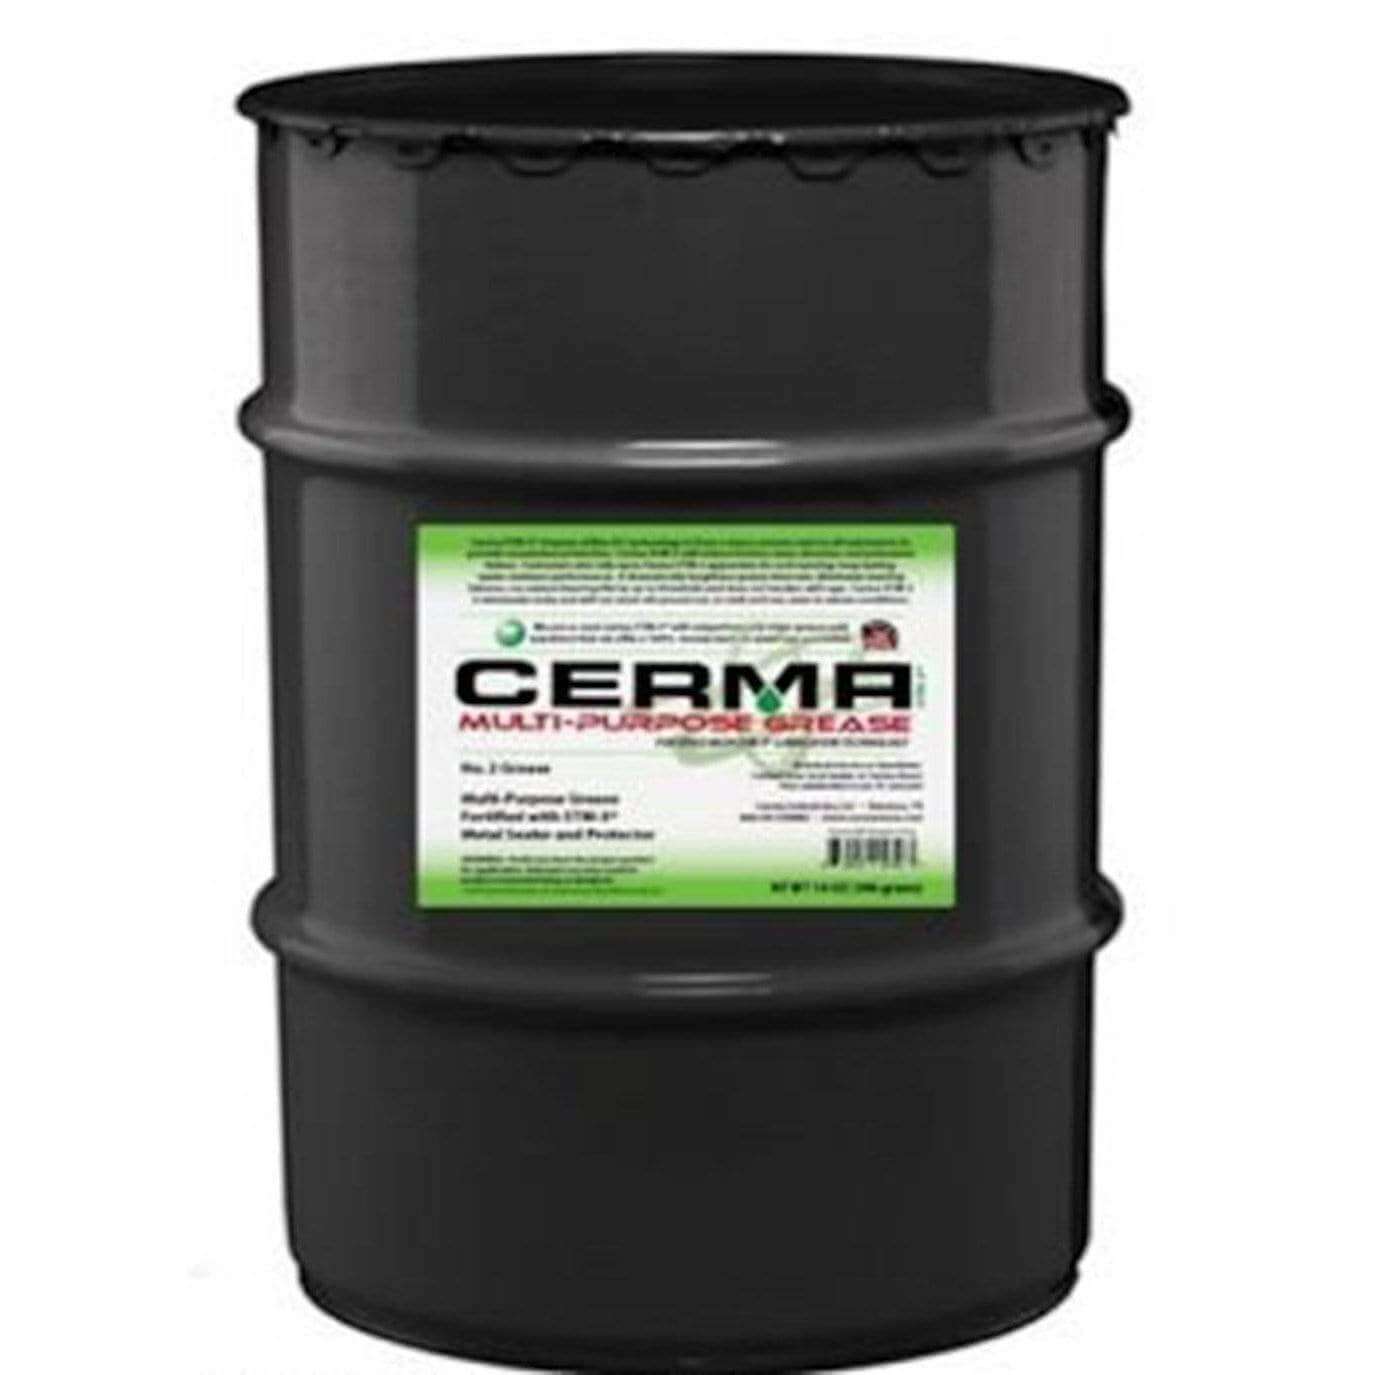 Cerma Ceramic Multi Purpose Grease at $3074.46 only from cermatreatment.com